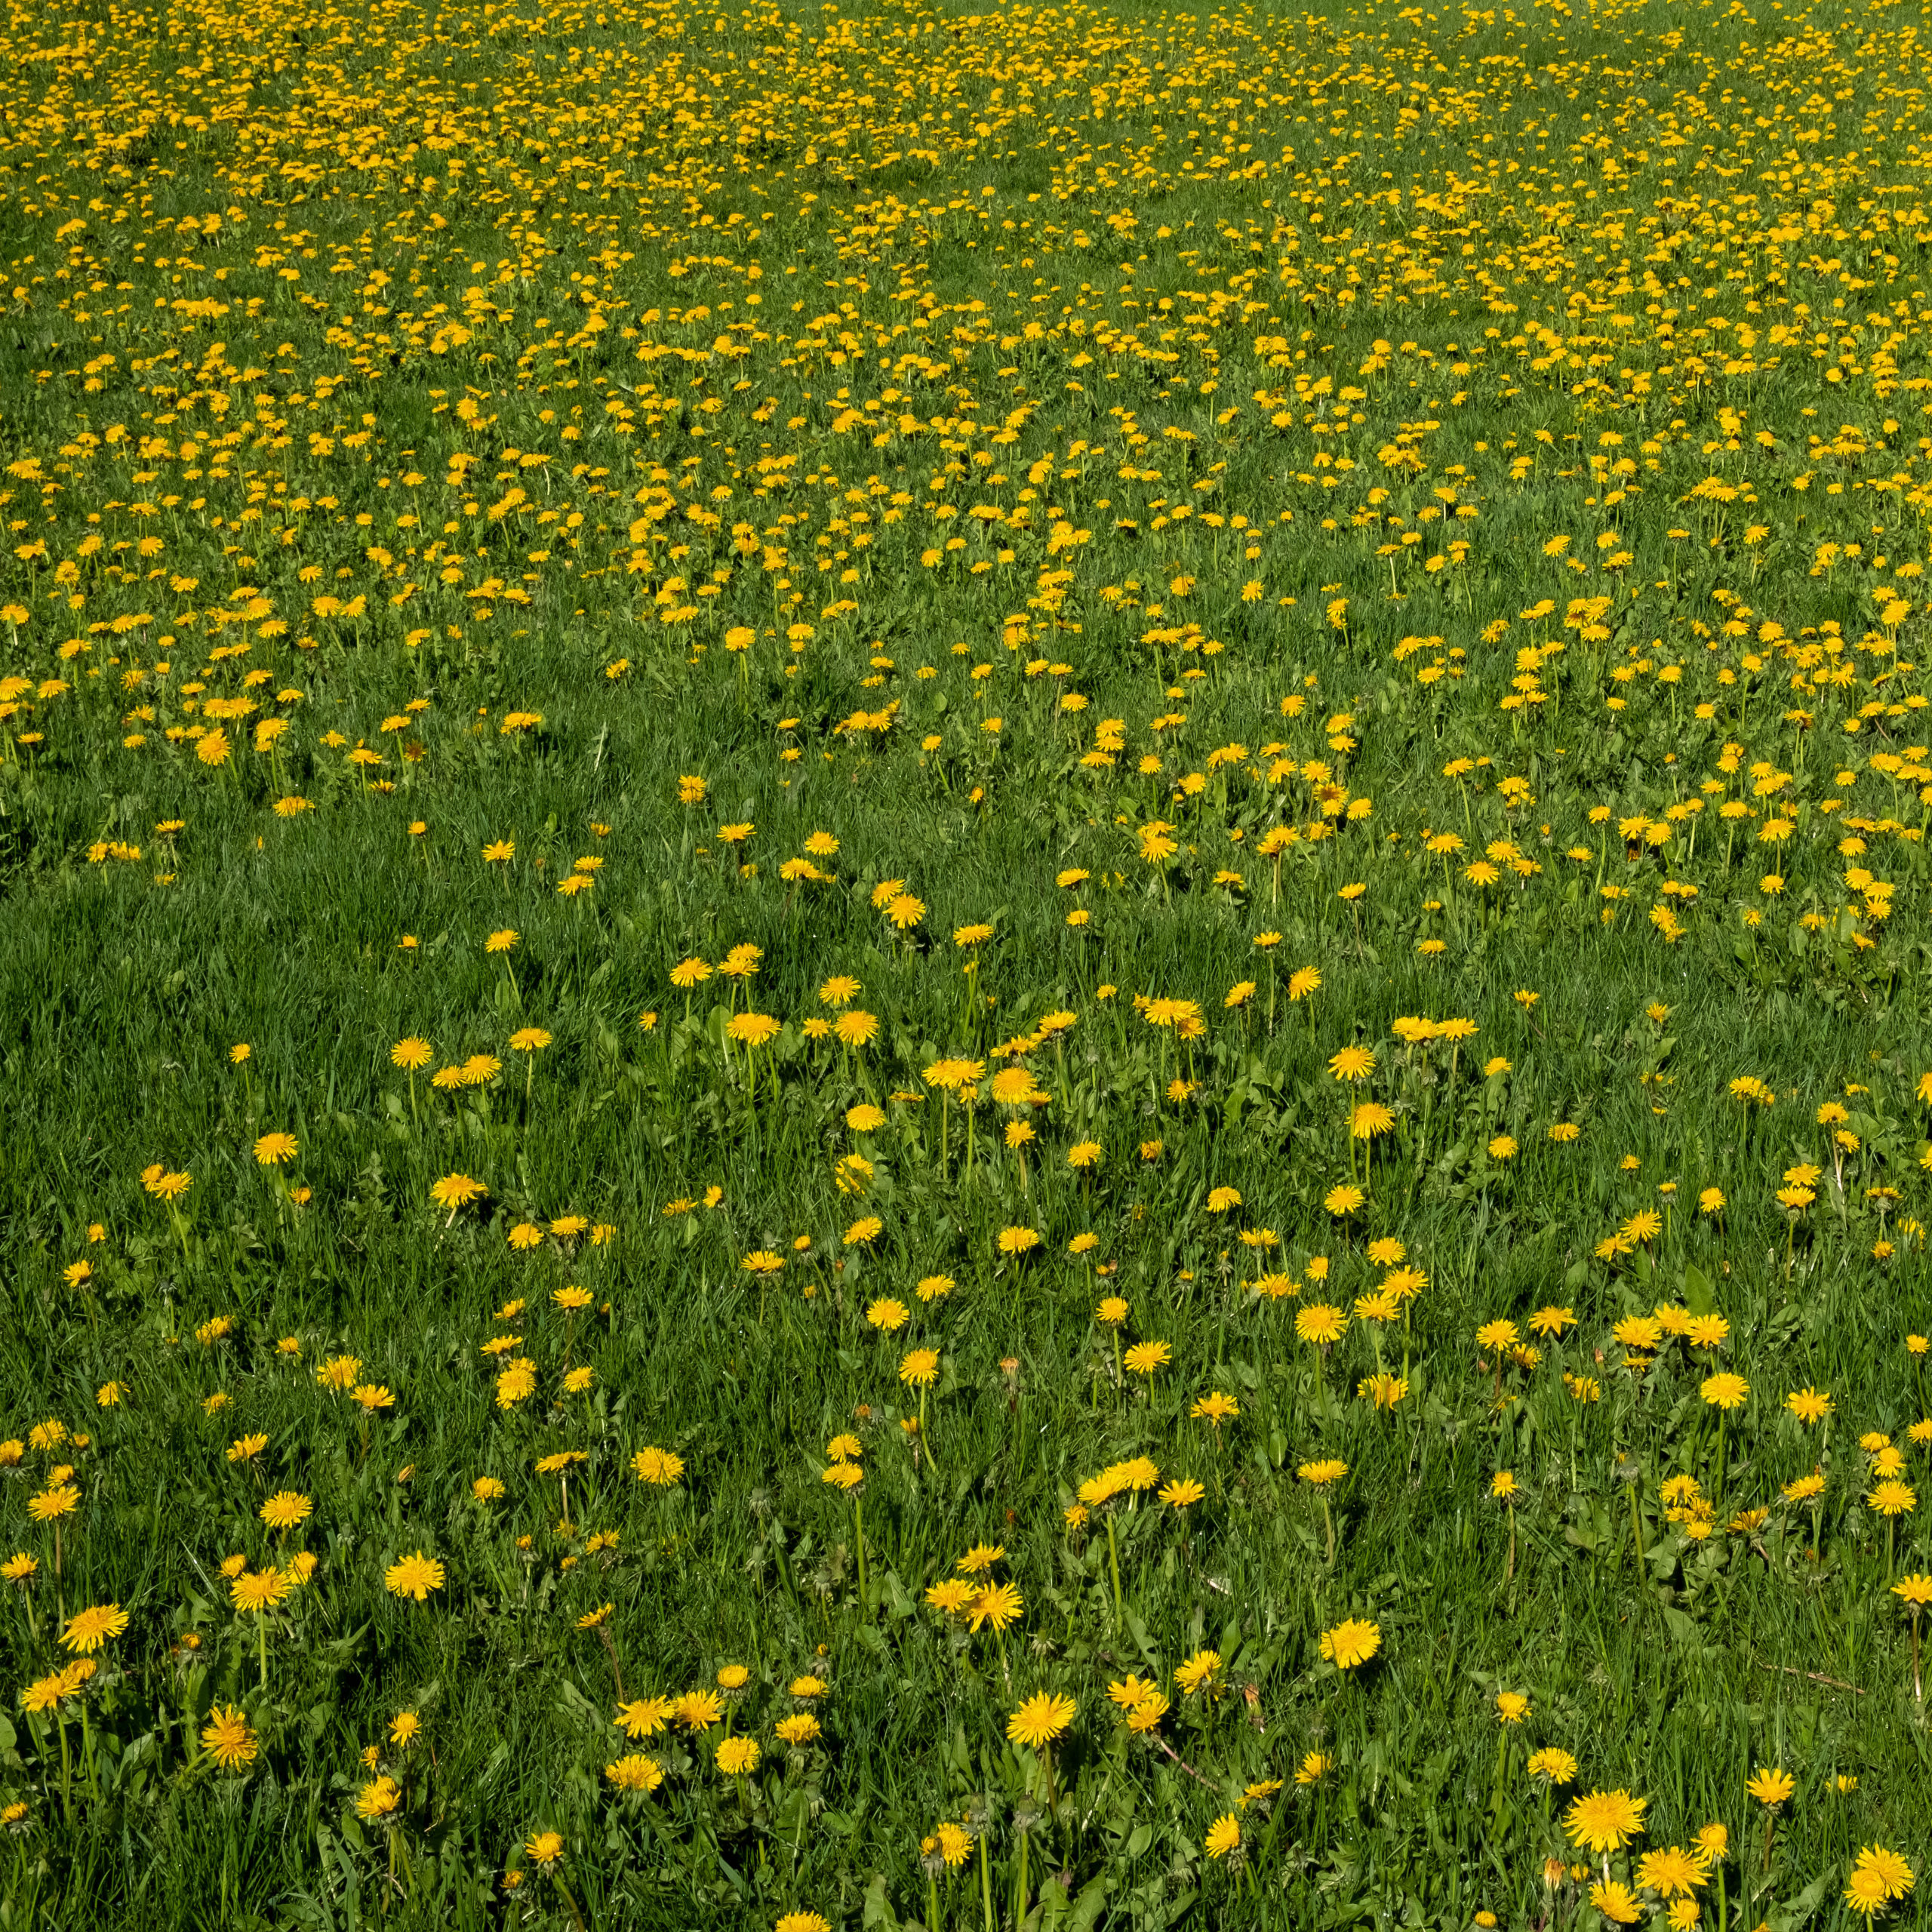 colour photo of a field of dandelions in full yellow bloom